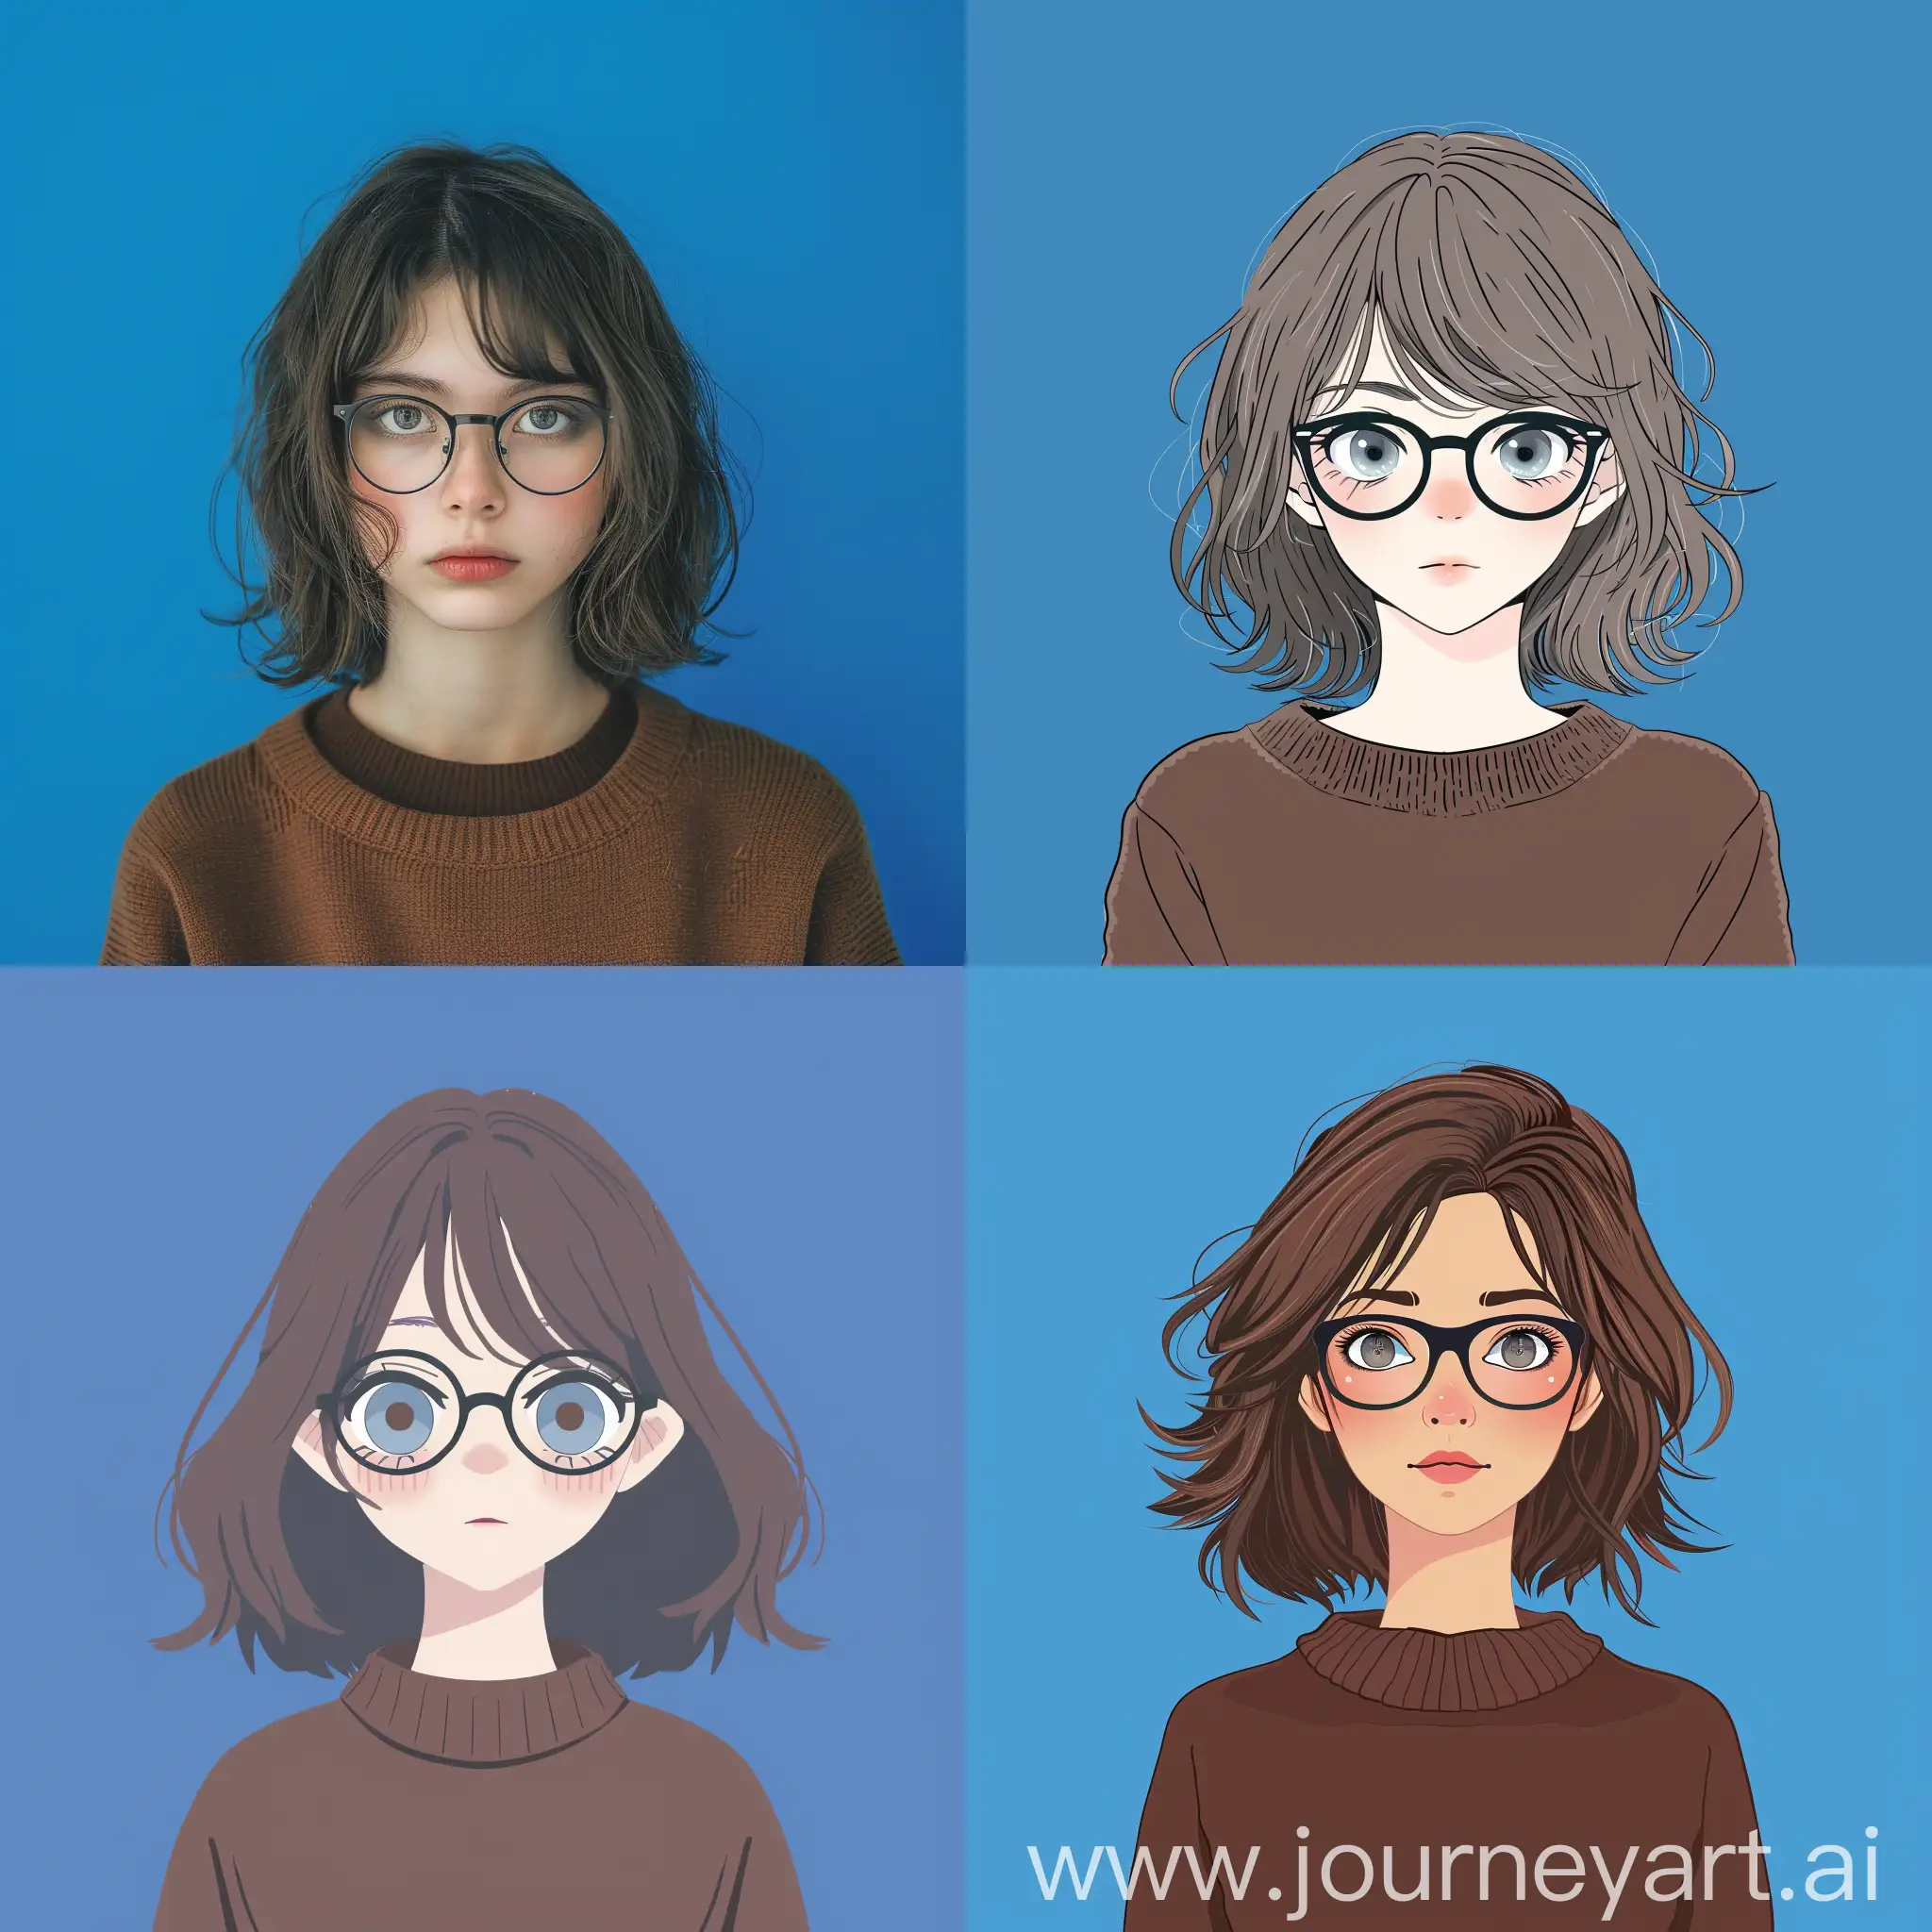 Adorable-BrownHaired-Girl-in-Glasses-Cute-Portrait-on-Solid-Blue-Background